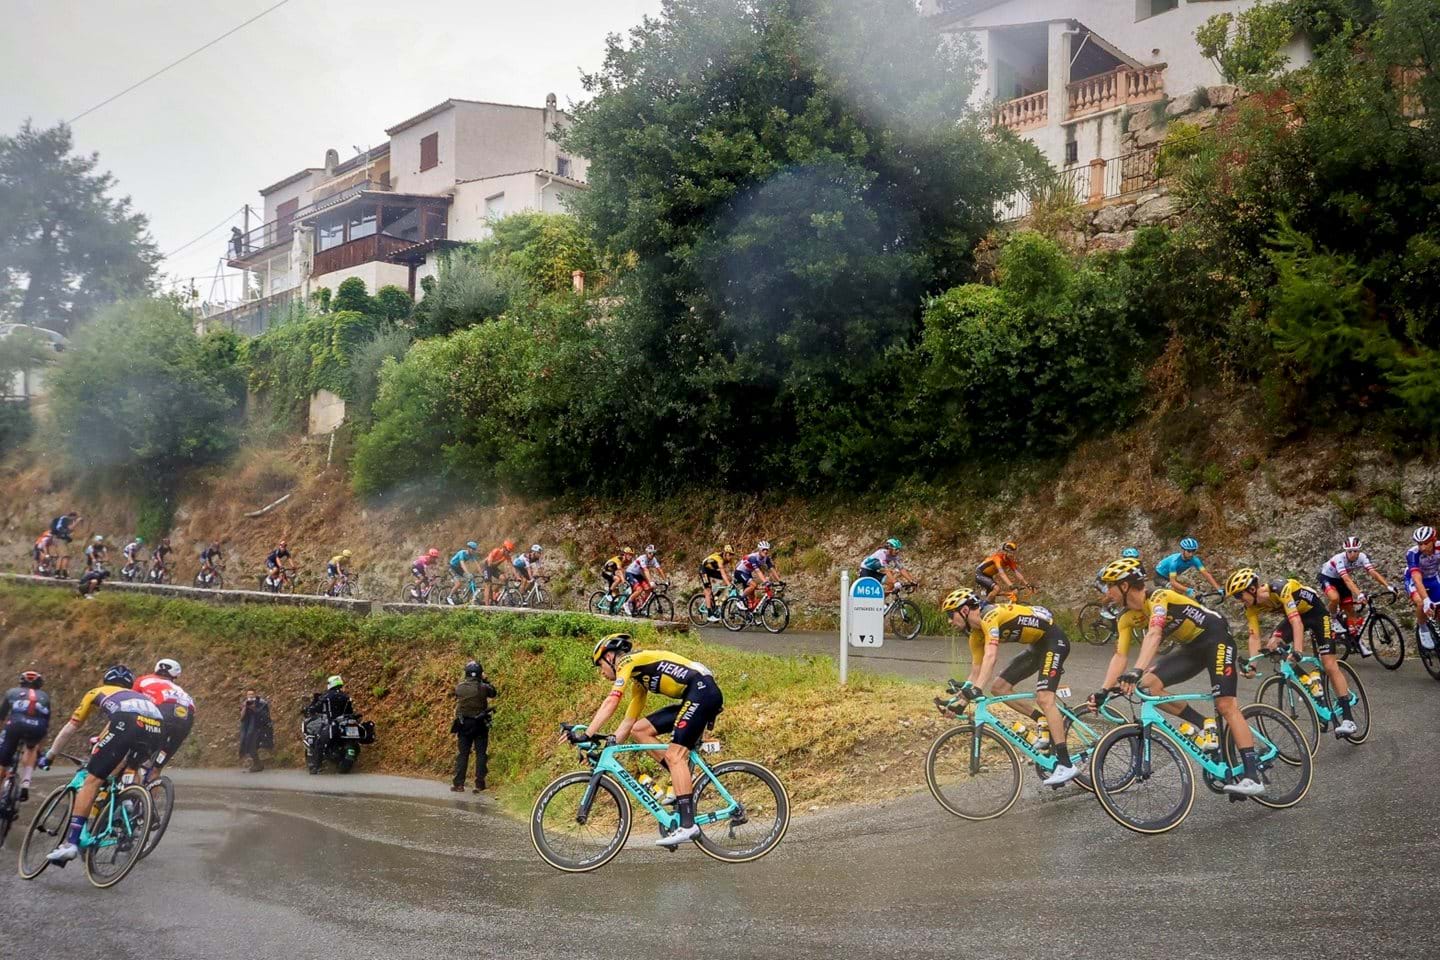 Cyclists go around a turn on a wet and rainy day at the 2020 Tour de France.